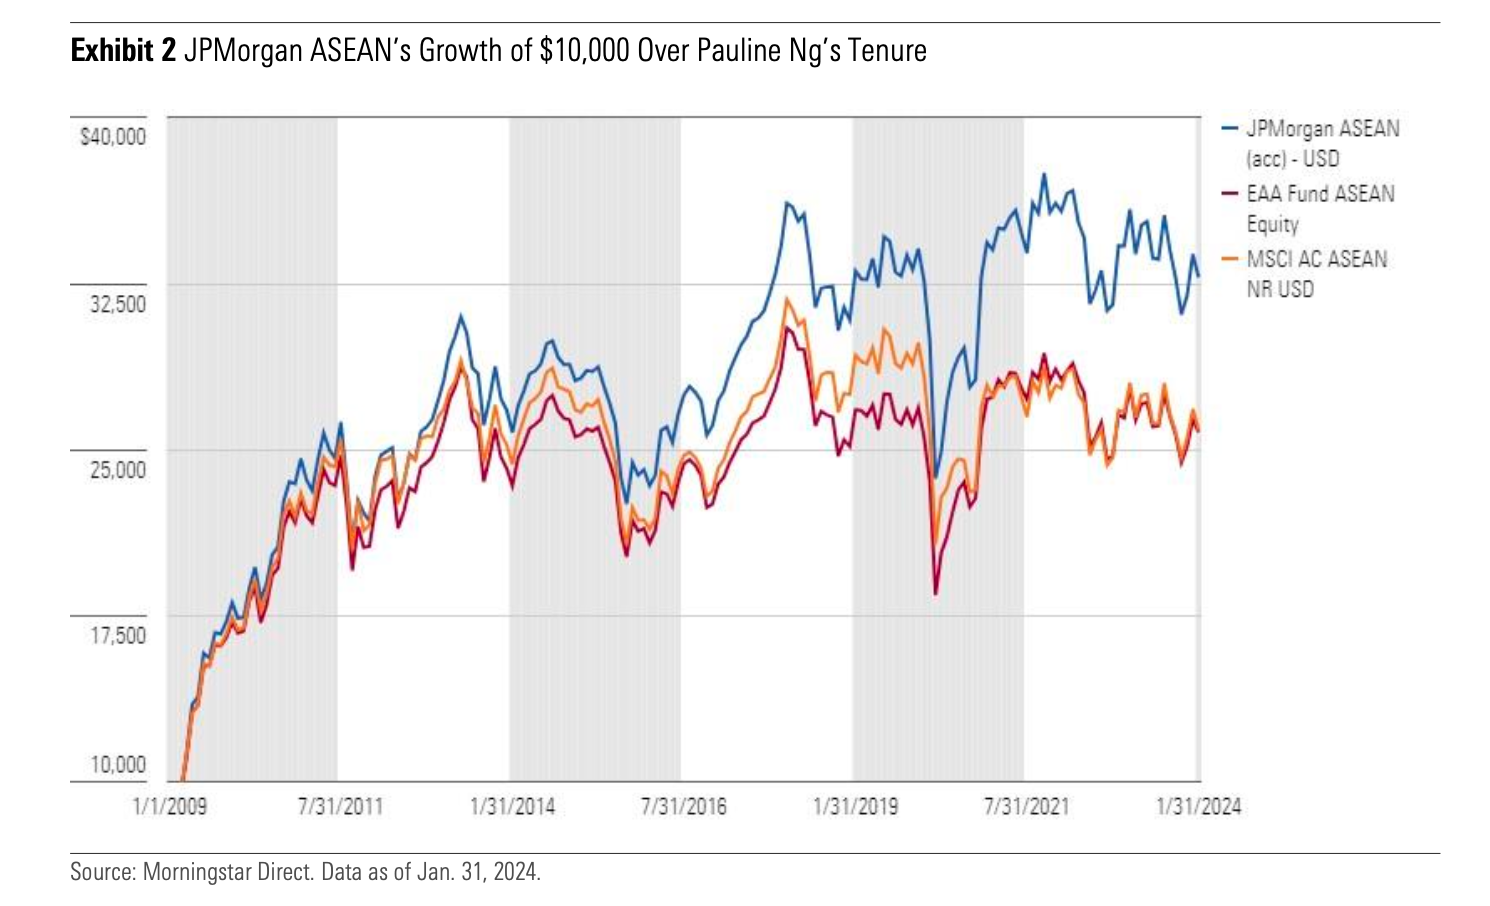 Line graph showing JPMorgan ASEAN (acc) from January 2009 through January 2024 compared to EAA Fund ASEAN Equity and MSCI AC ASEAN NR USD. 